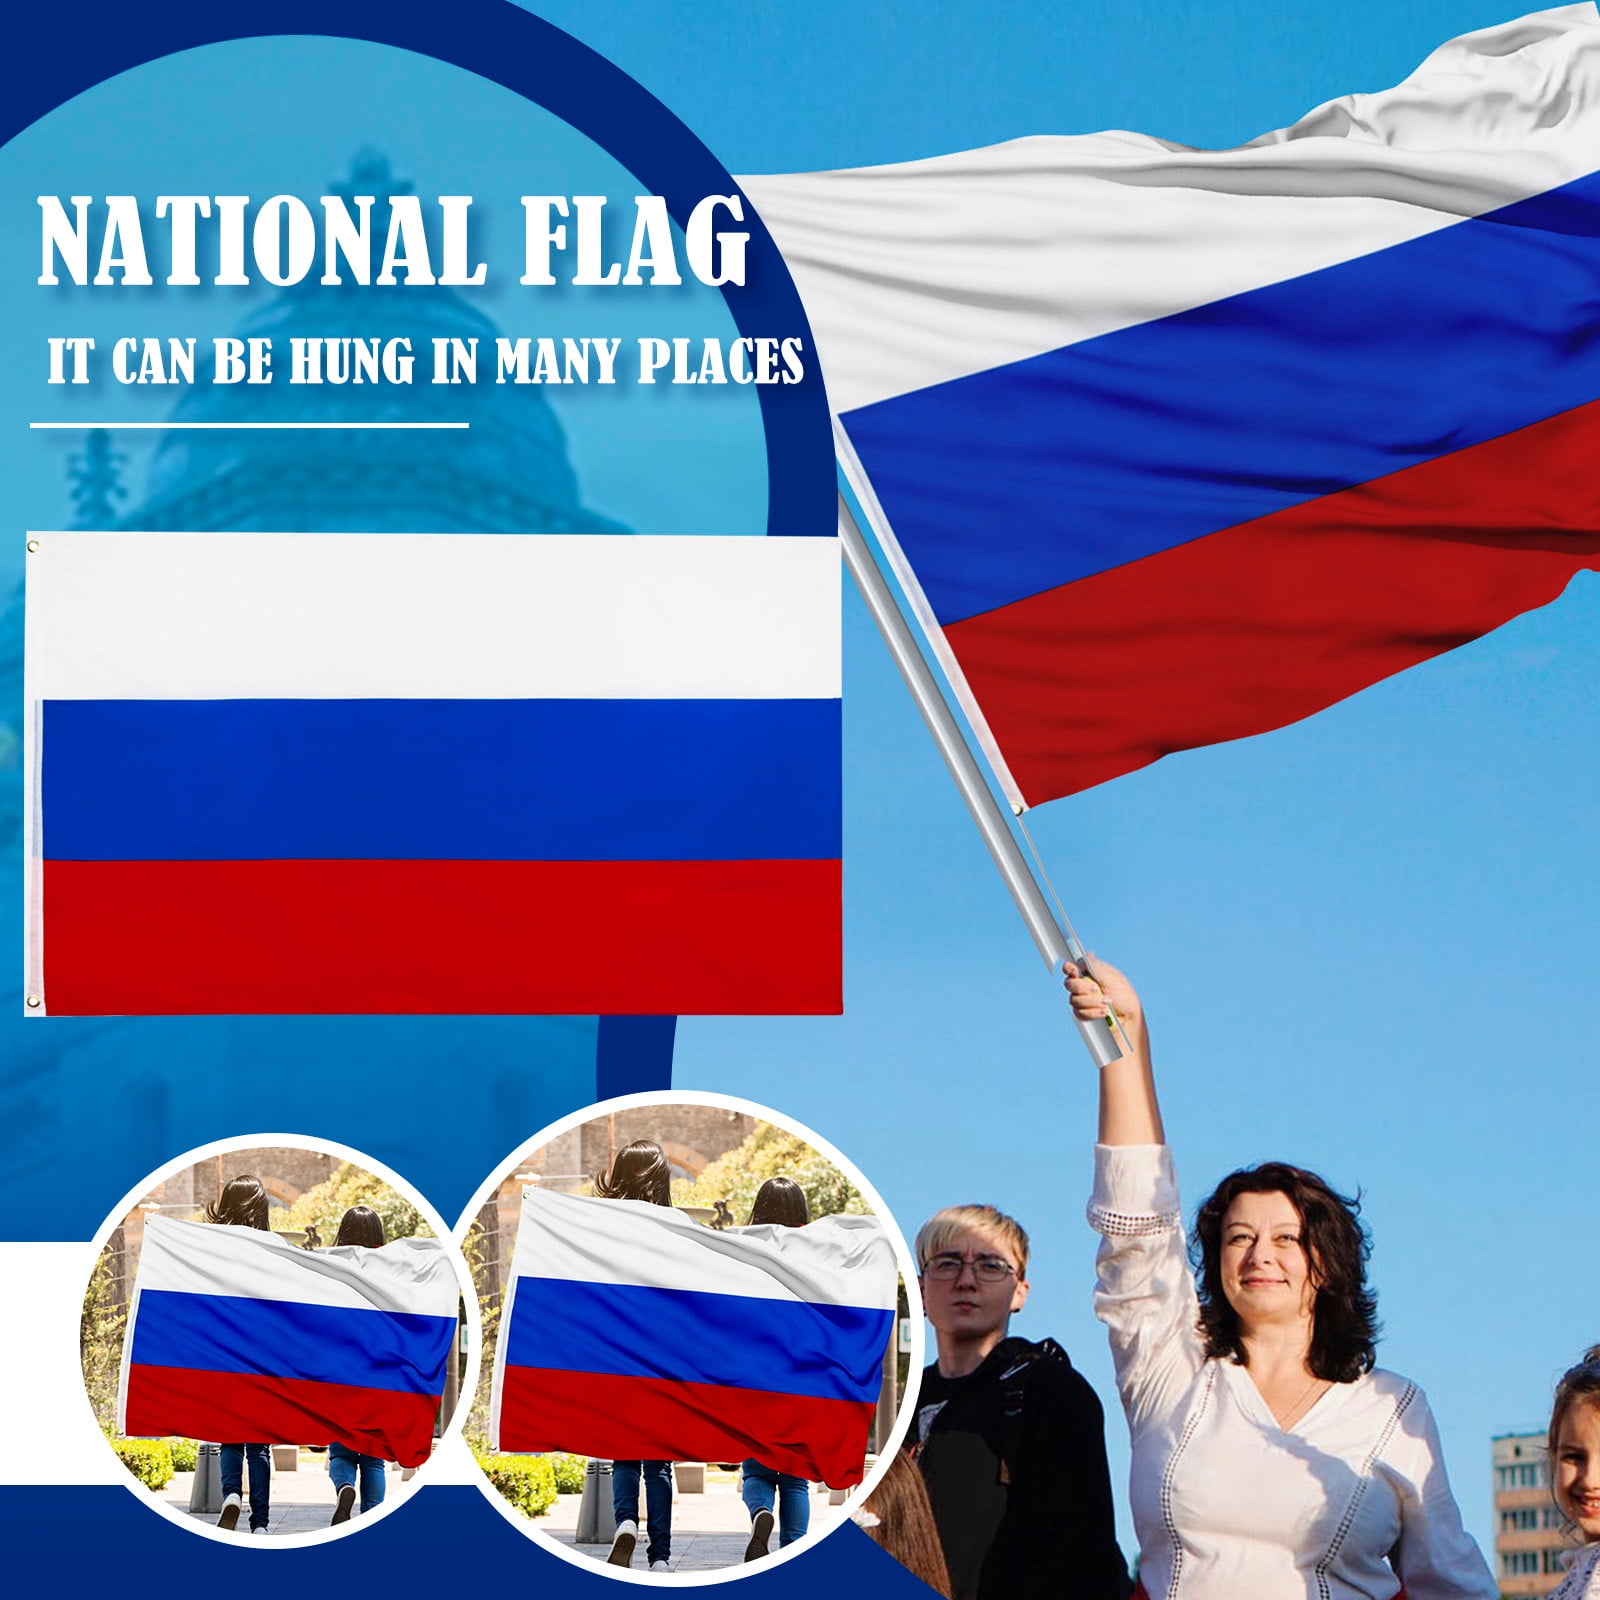  AZ FLAG - Russia Flag - 3x5 Ft - 100D Polyester Russian Banner  with Two Metal Grommets - Fade Resistant - Vivid Colors - 3' x 5' Feet -  150x90 Cm : Patio, Lawn & Garden